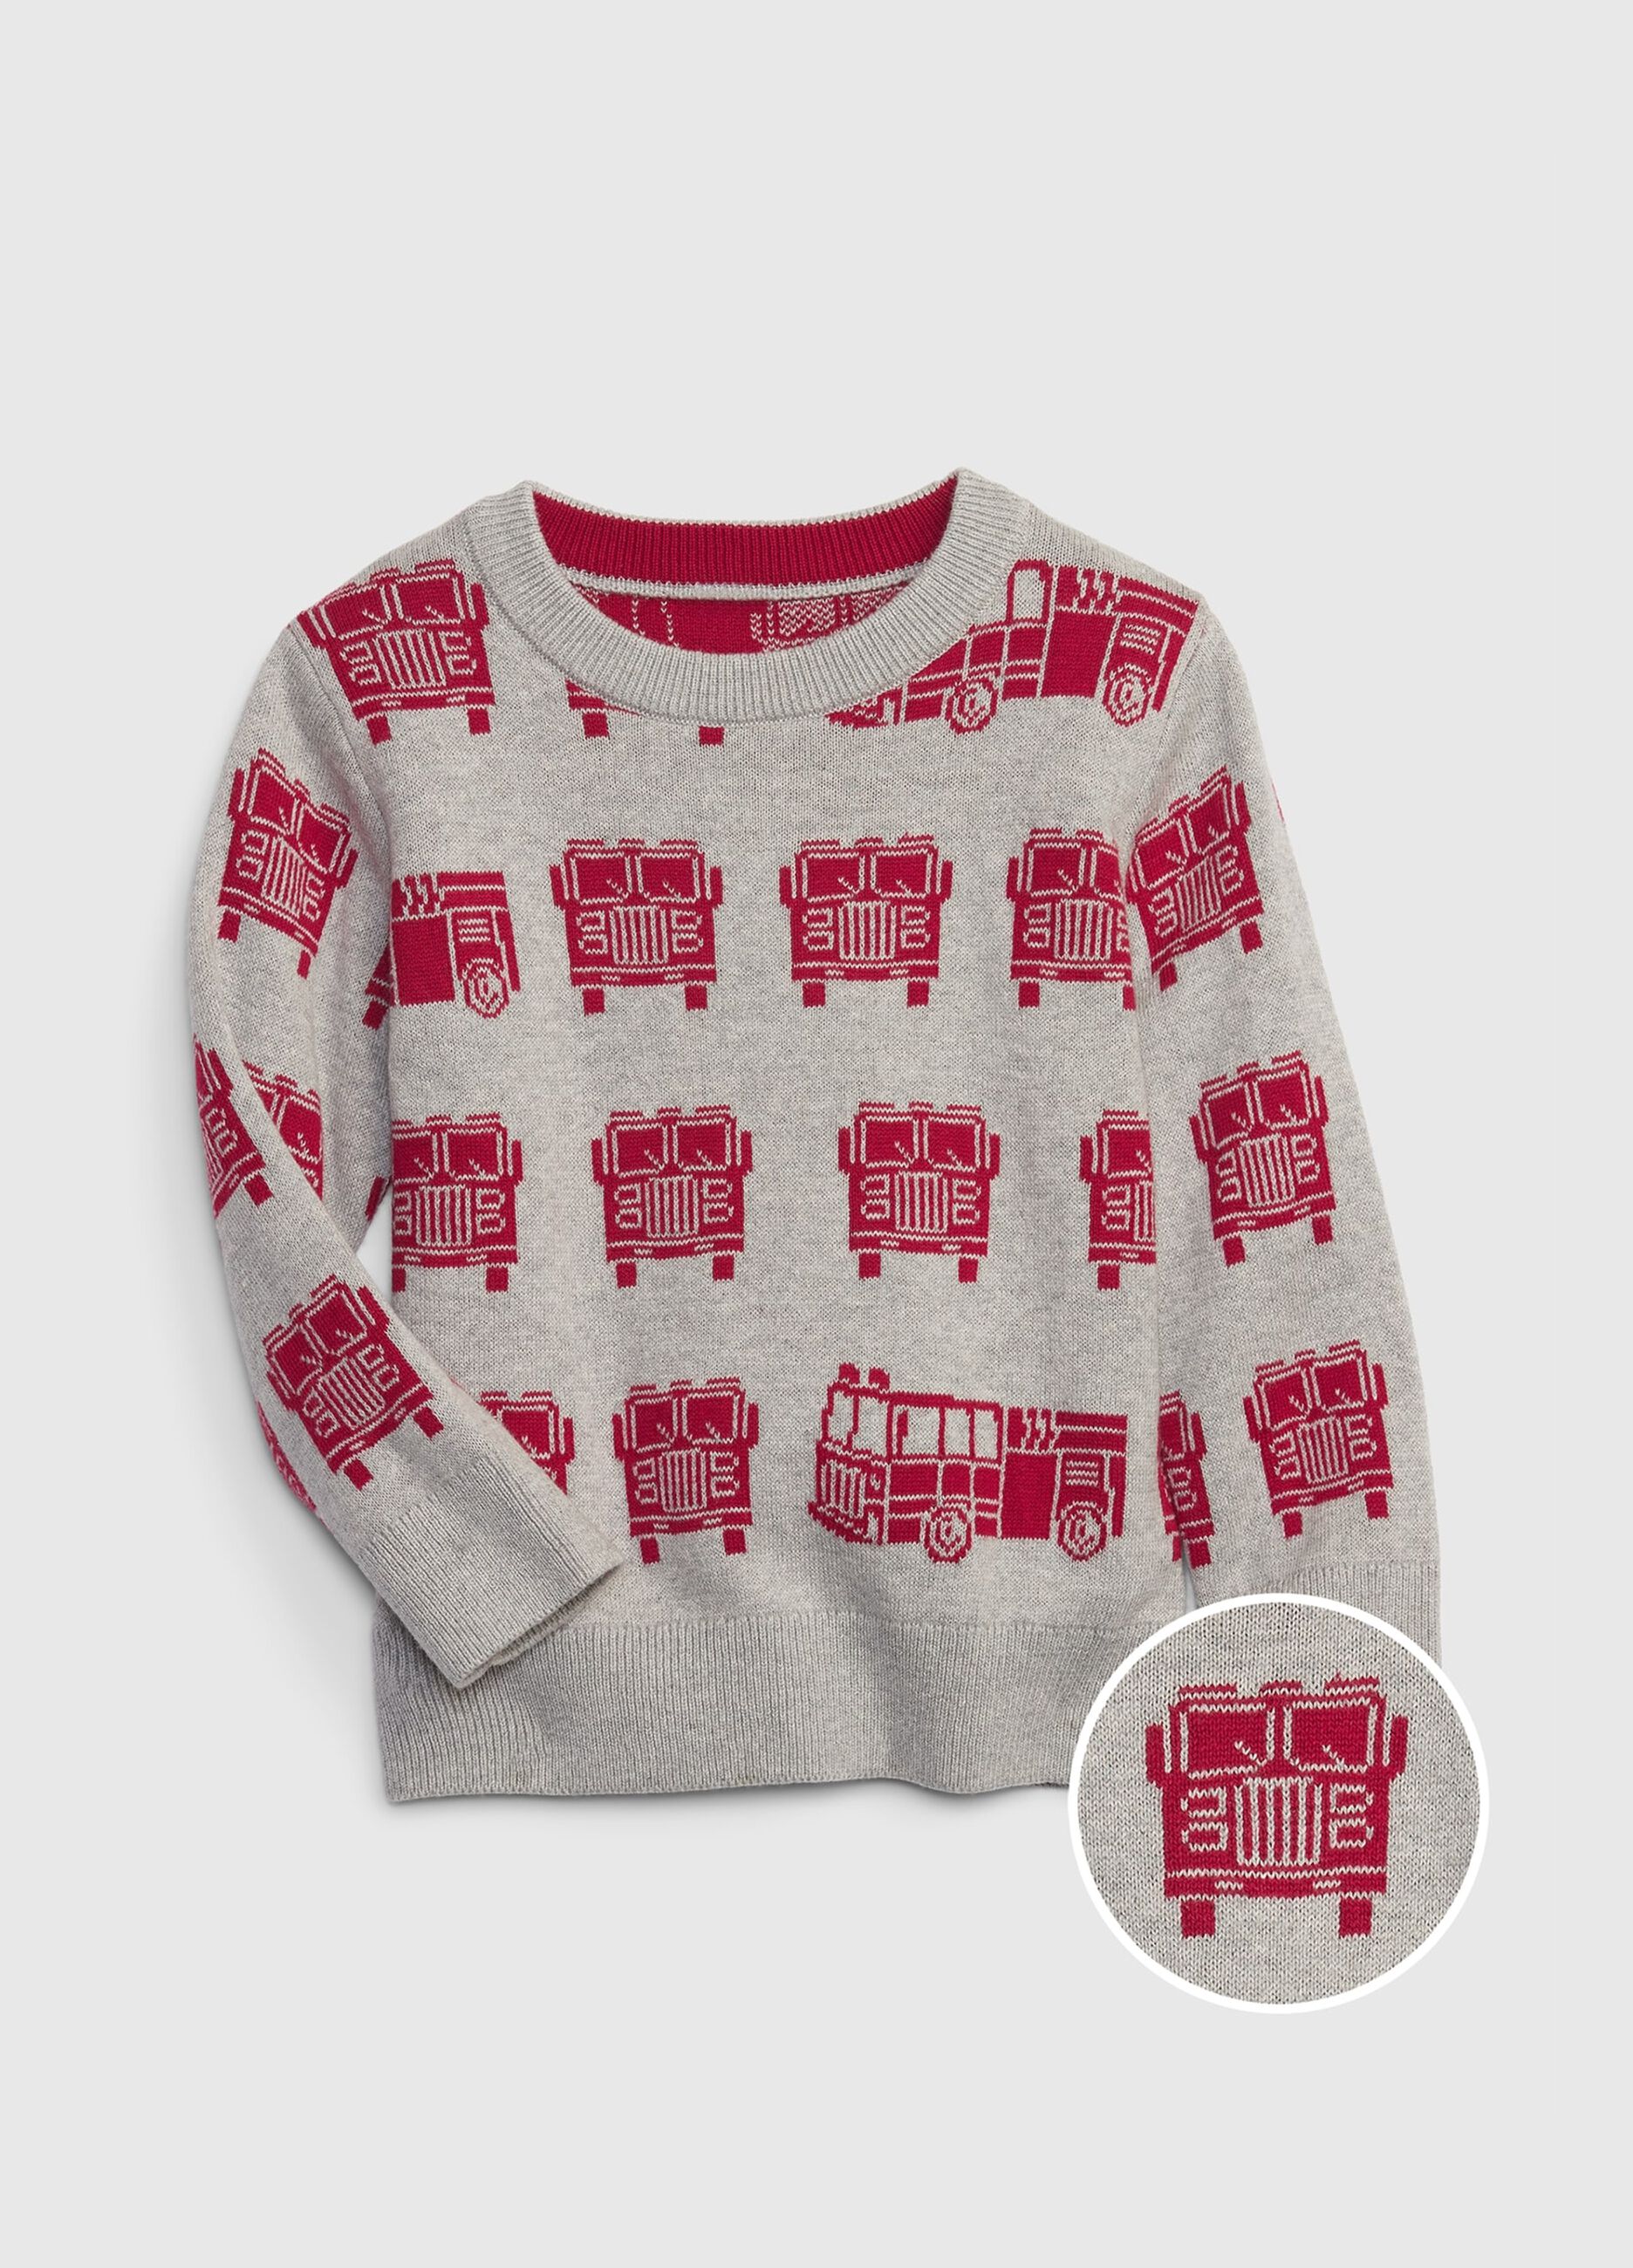 Pullover with fire truck design